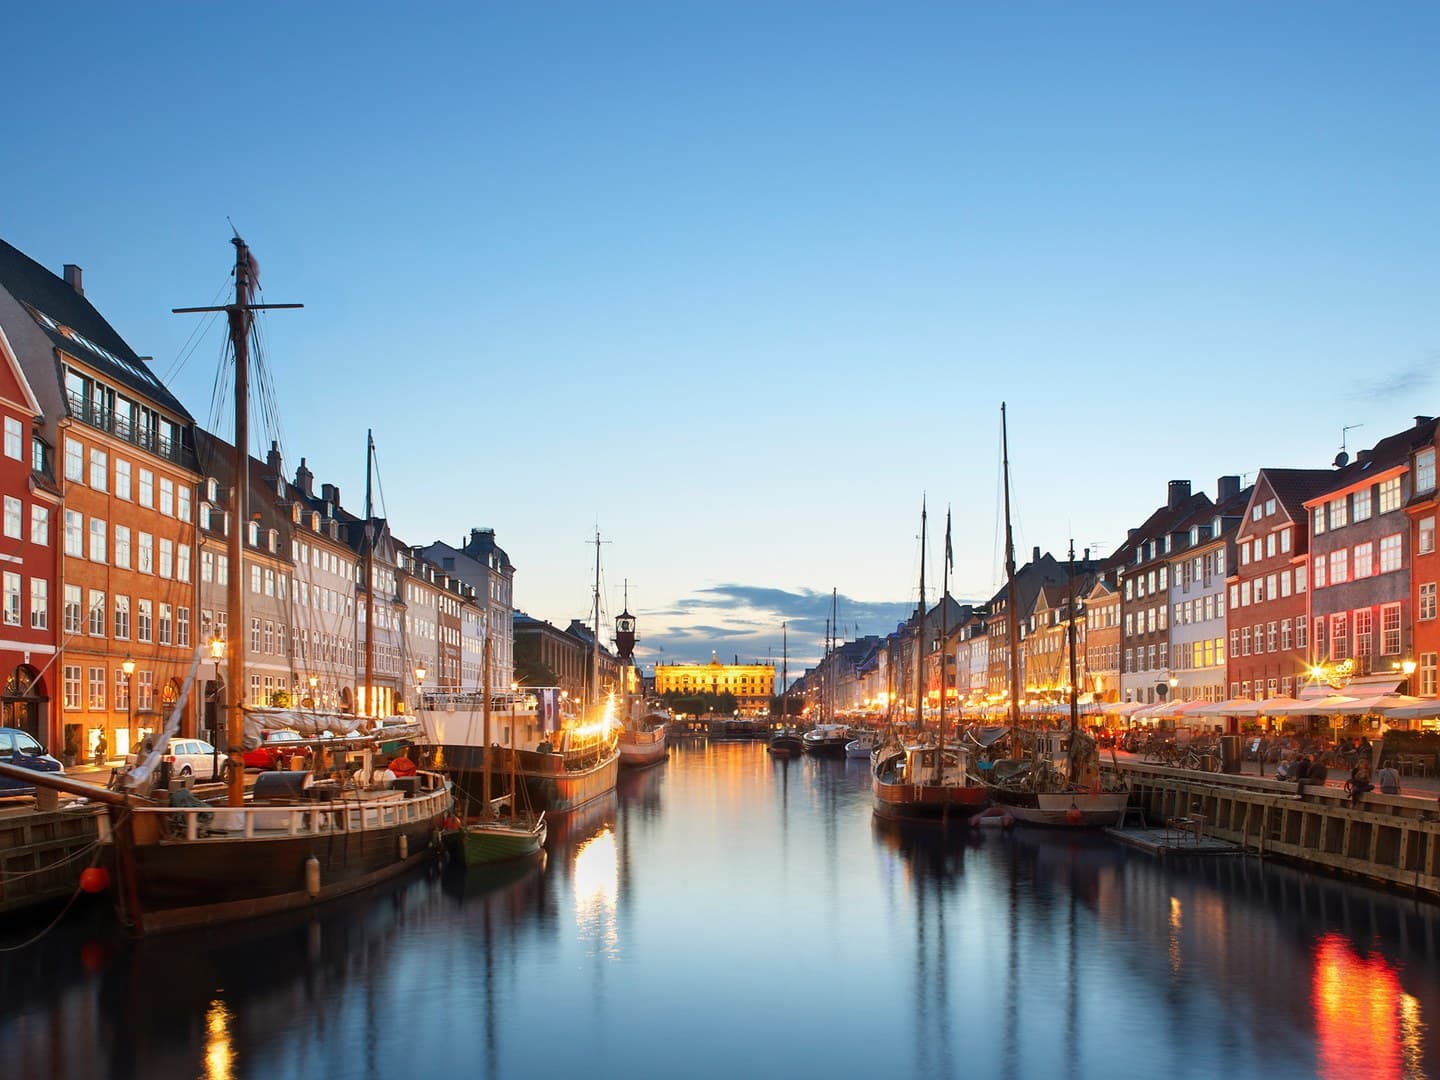 Copenhagen canal must-see while visiting Scandinavia